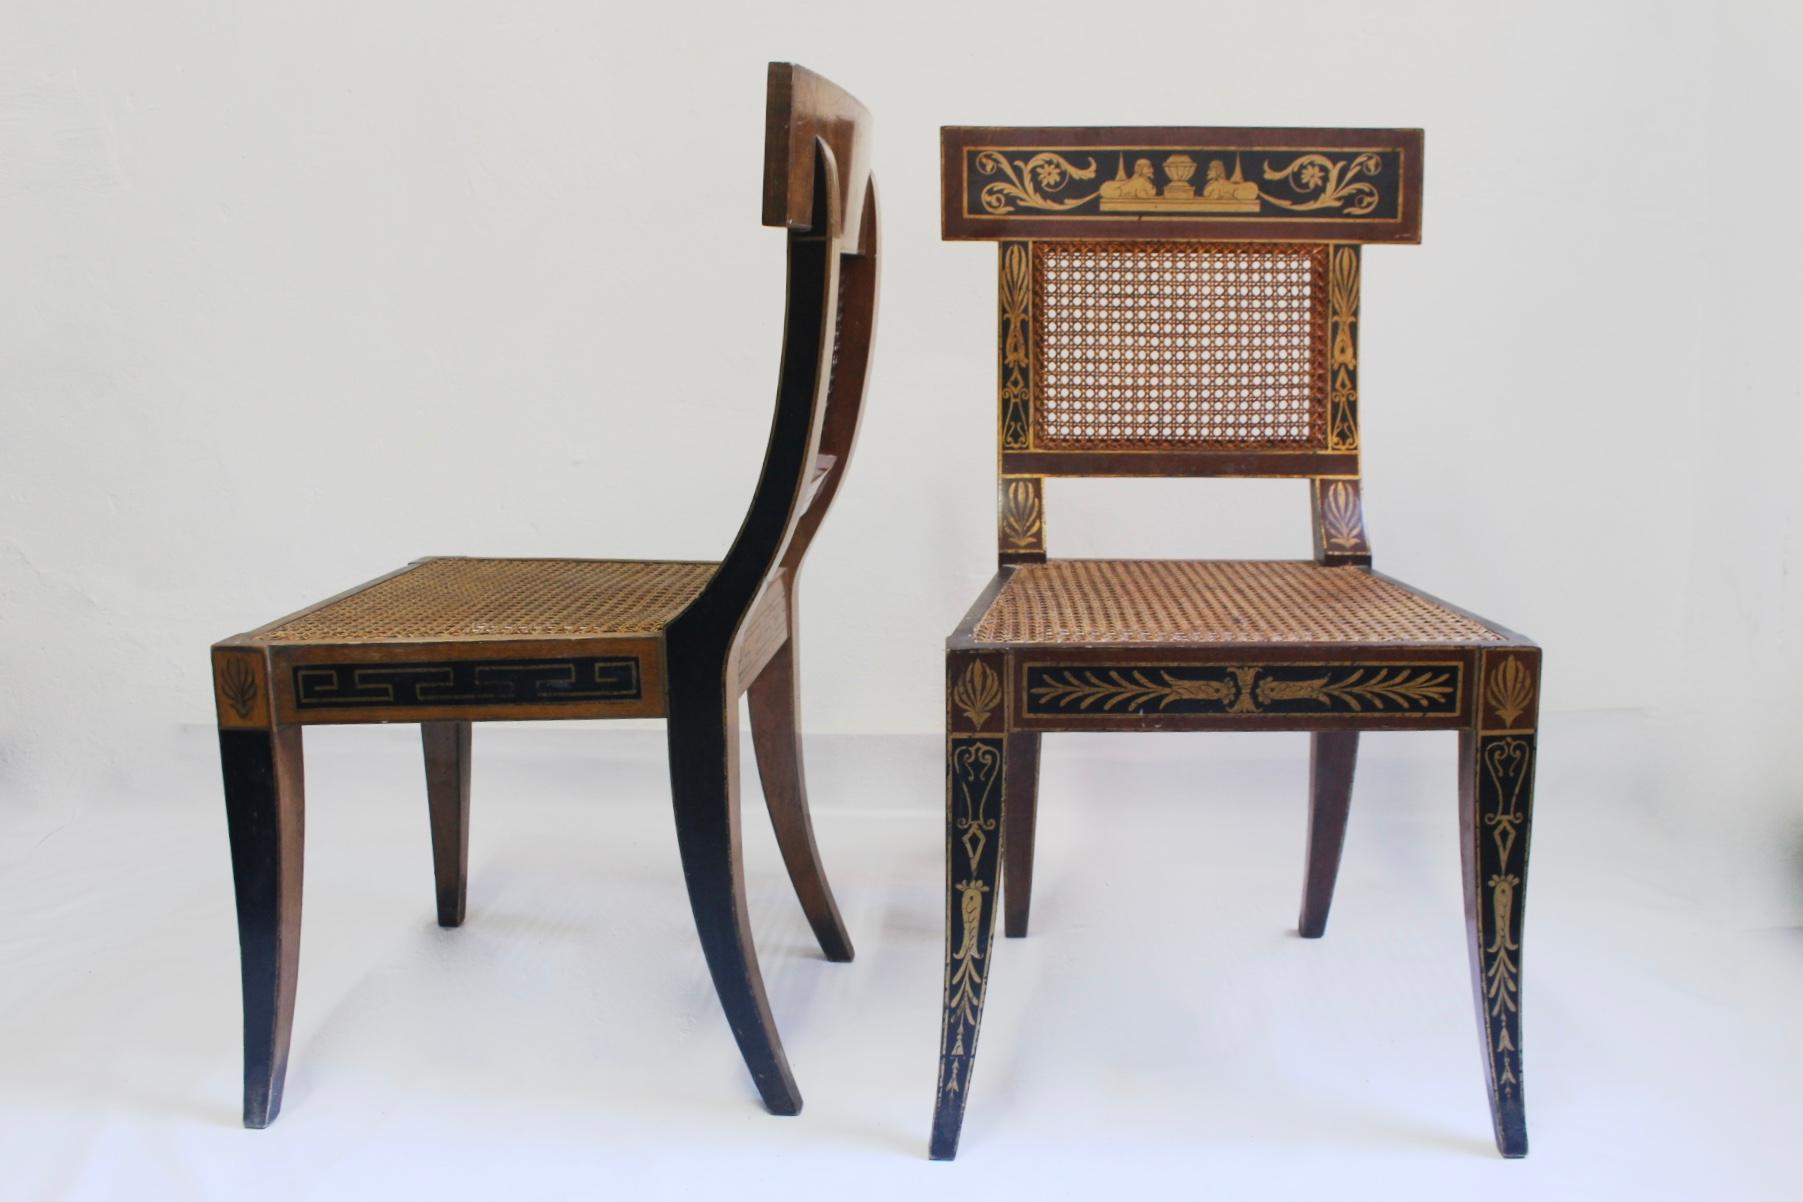 Impressive midcentury pair of Greek revival hand painted Klismos chair with caned back and seat, this ‘klismos’ form chair is painted with acanthus leaves other classical decorative motifs., made in EEUU in the 1950s in the manner of the Waln family